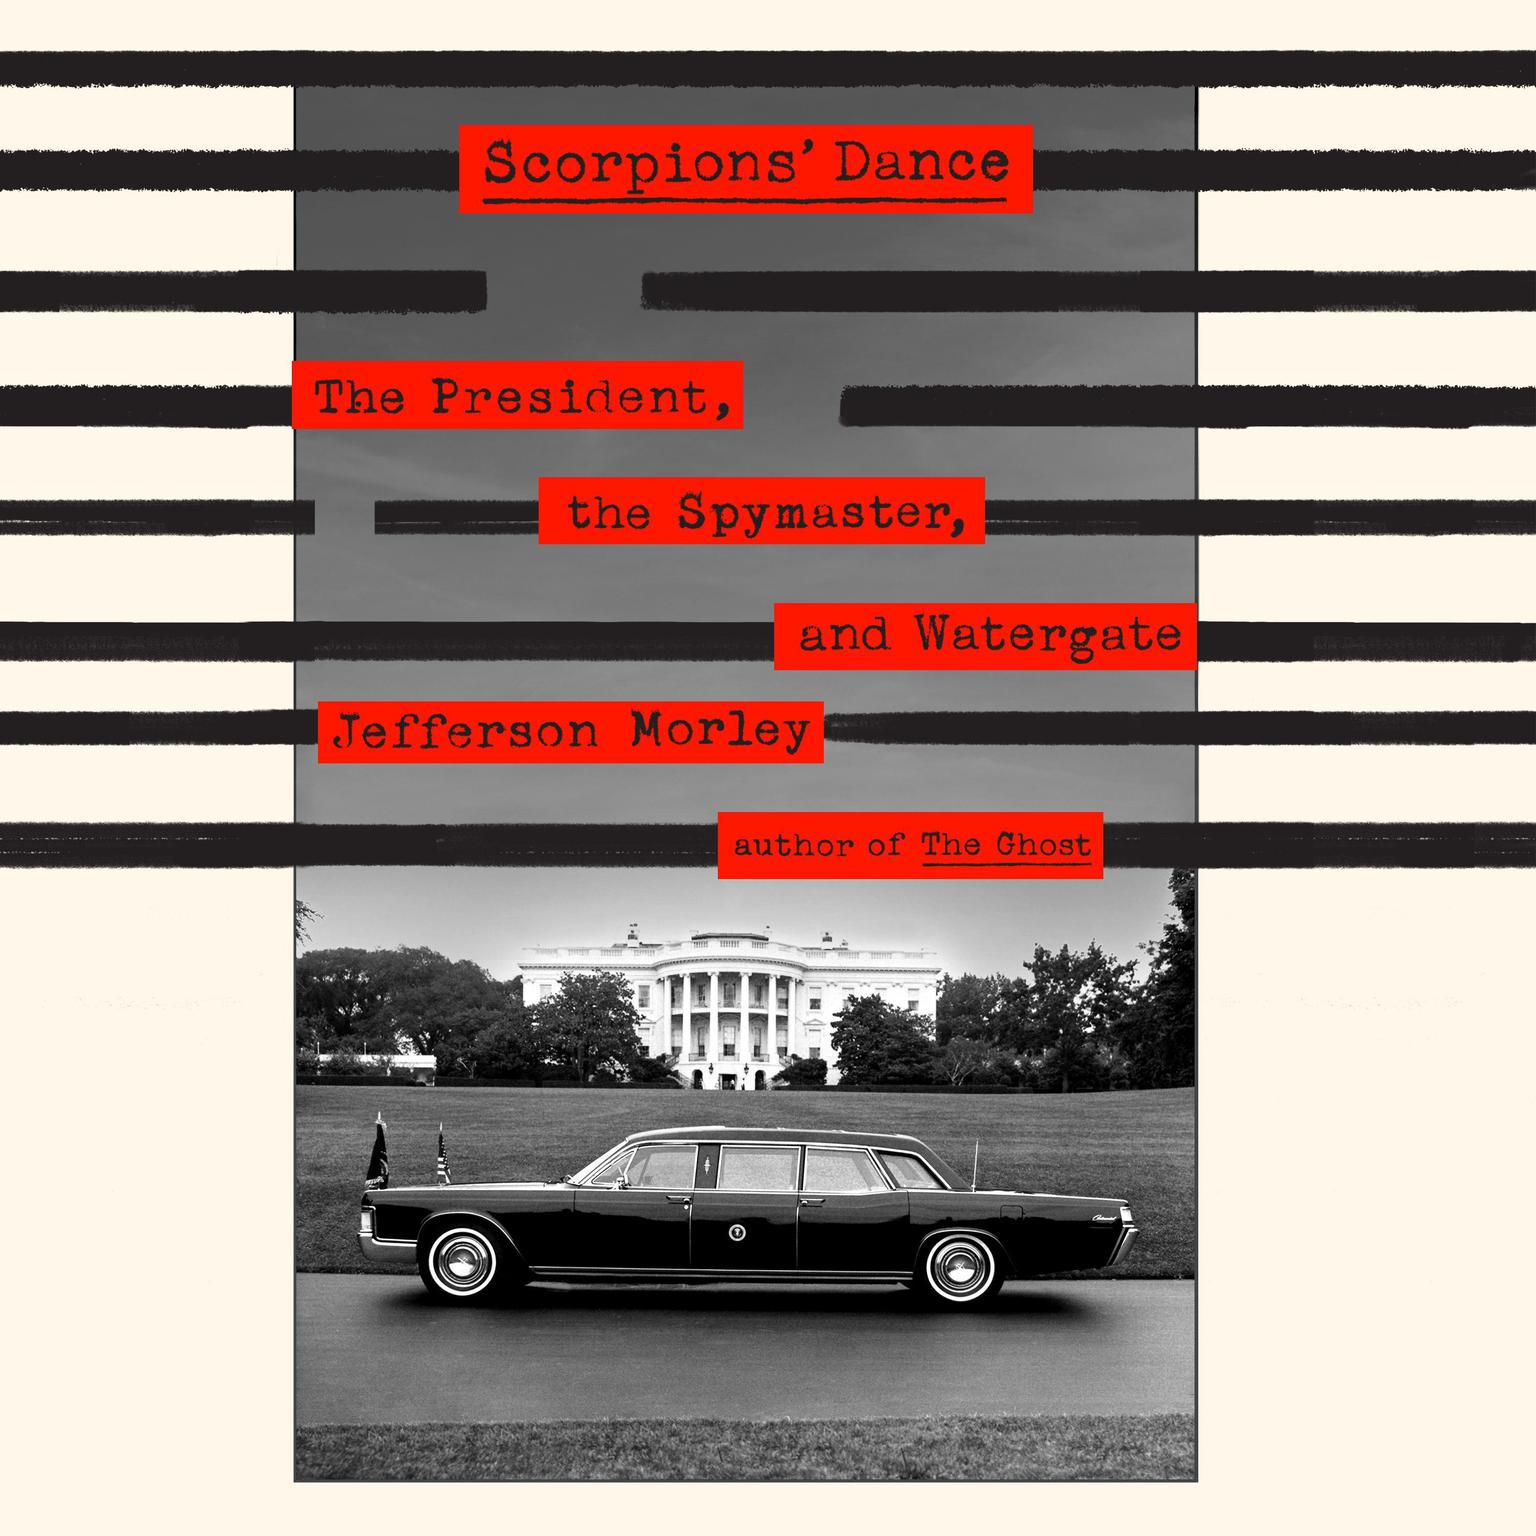 Scorpions Dance: The President, the Spymaster, and Watergate Audiobook, by Jefferson Morley